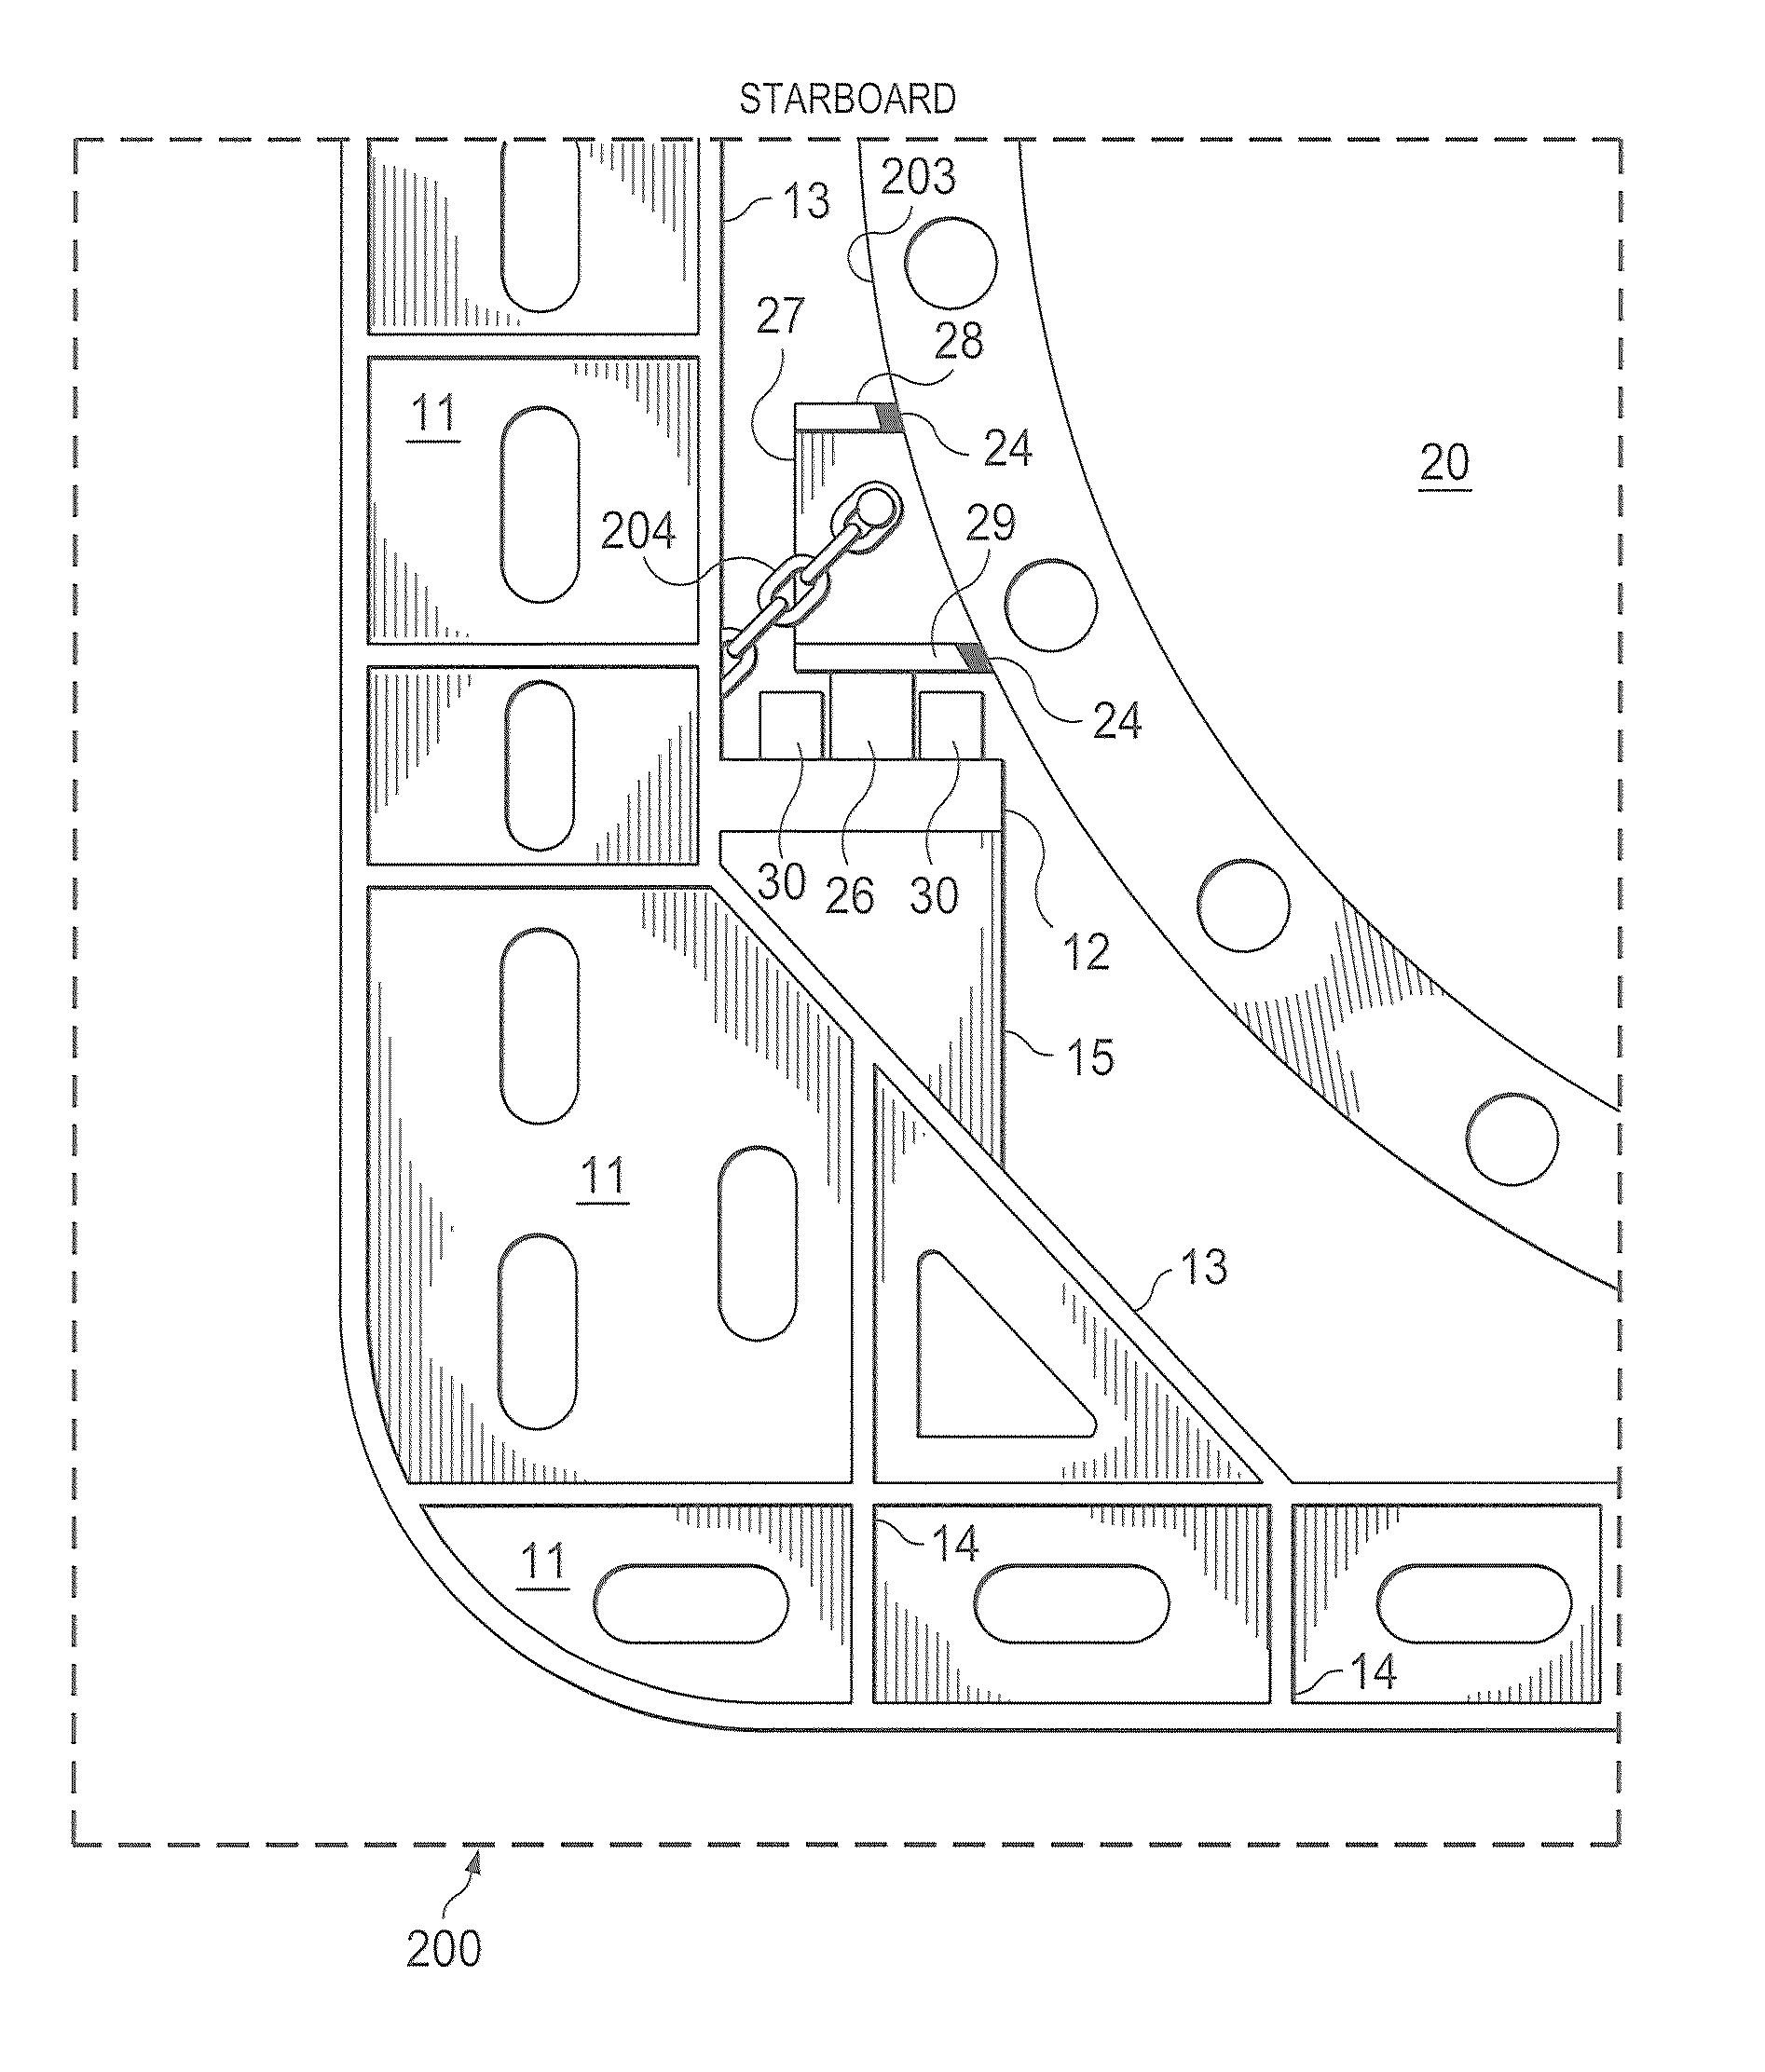 Systems and methods for supporting tanks in a cargo ship